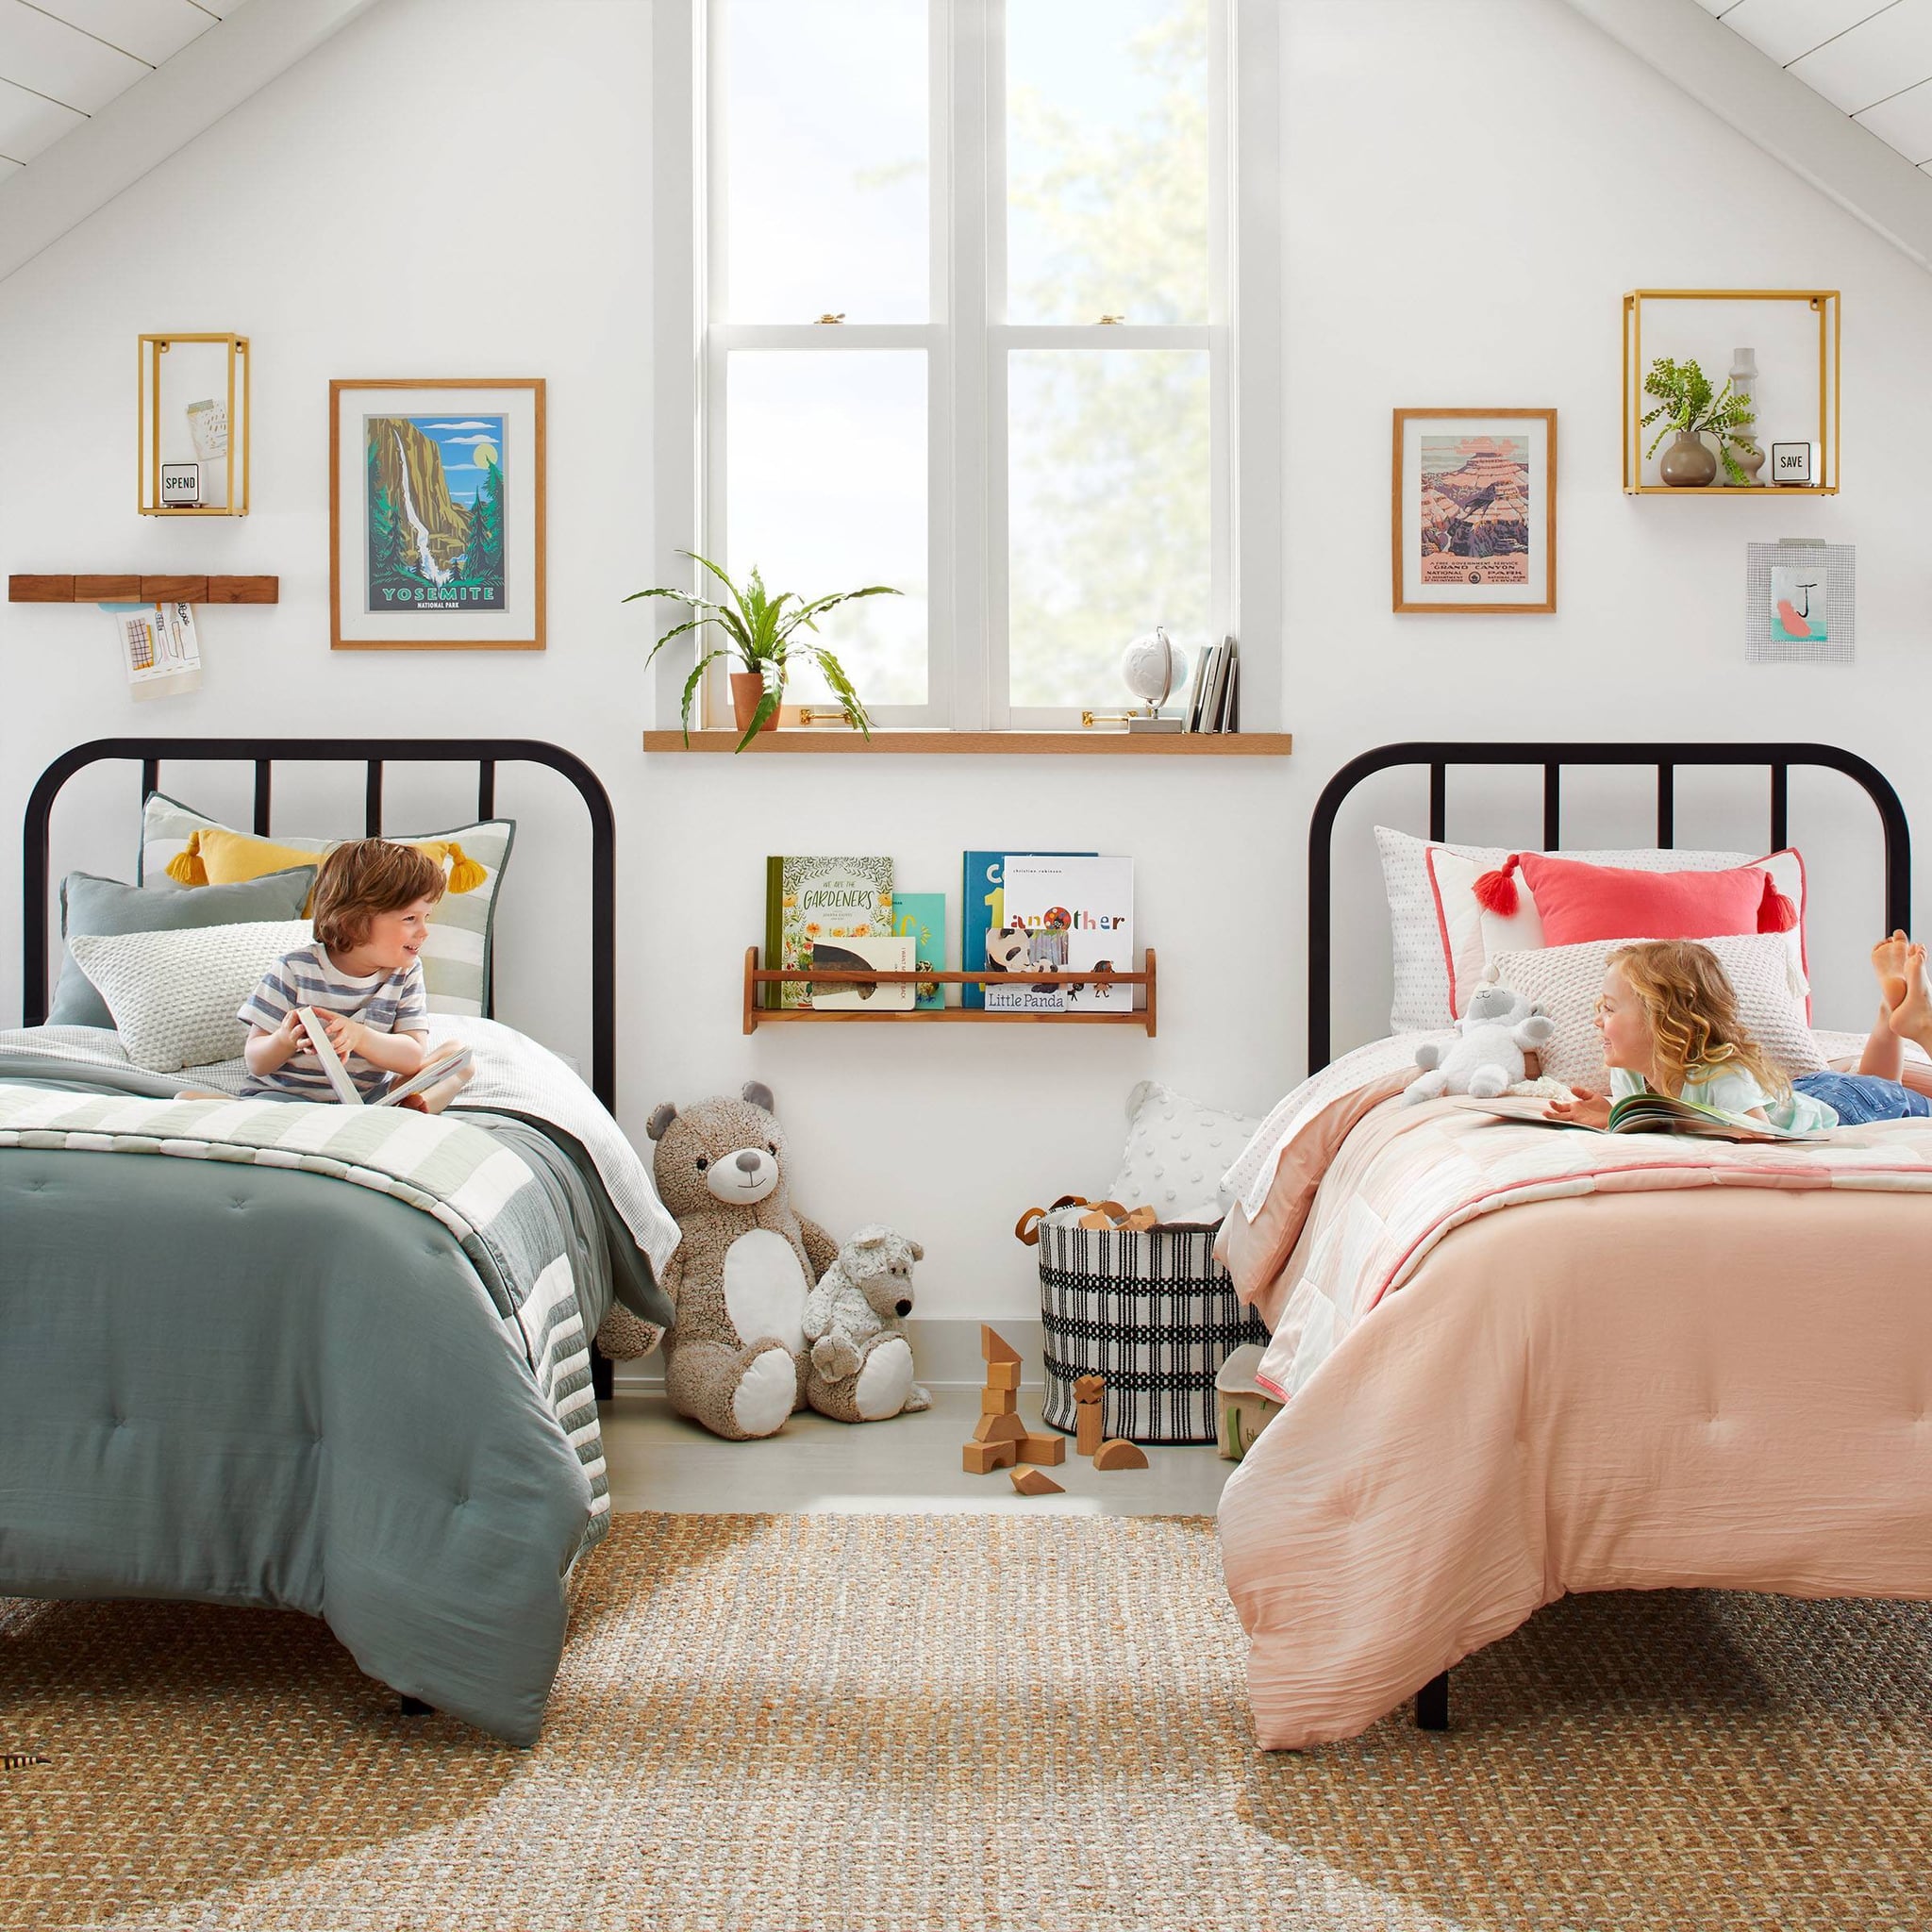 Kids Hearth And Hand Bedding And Decor At Target Popsugar Family